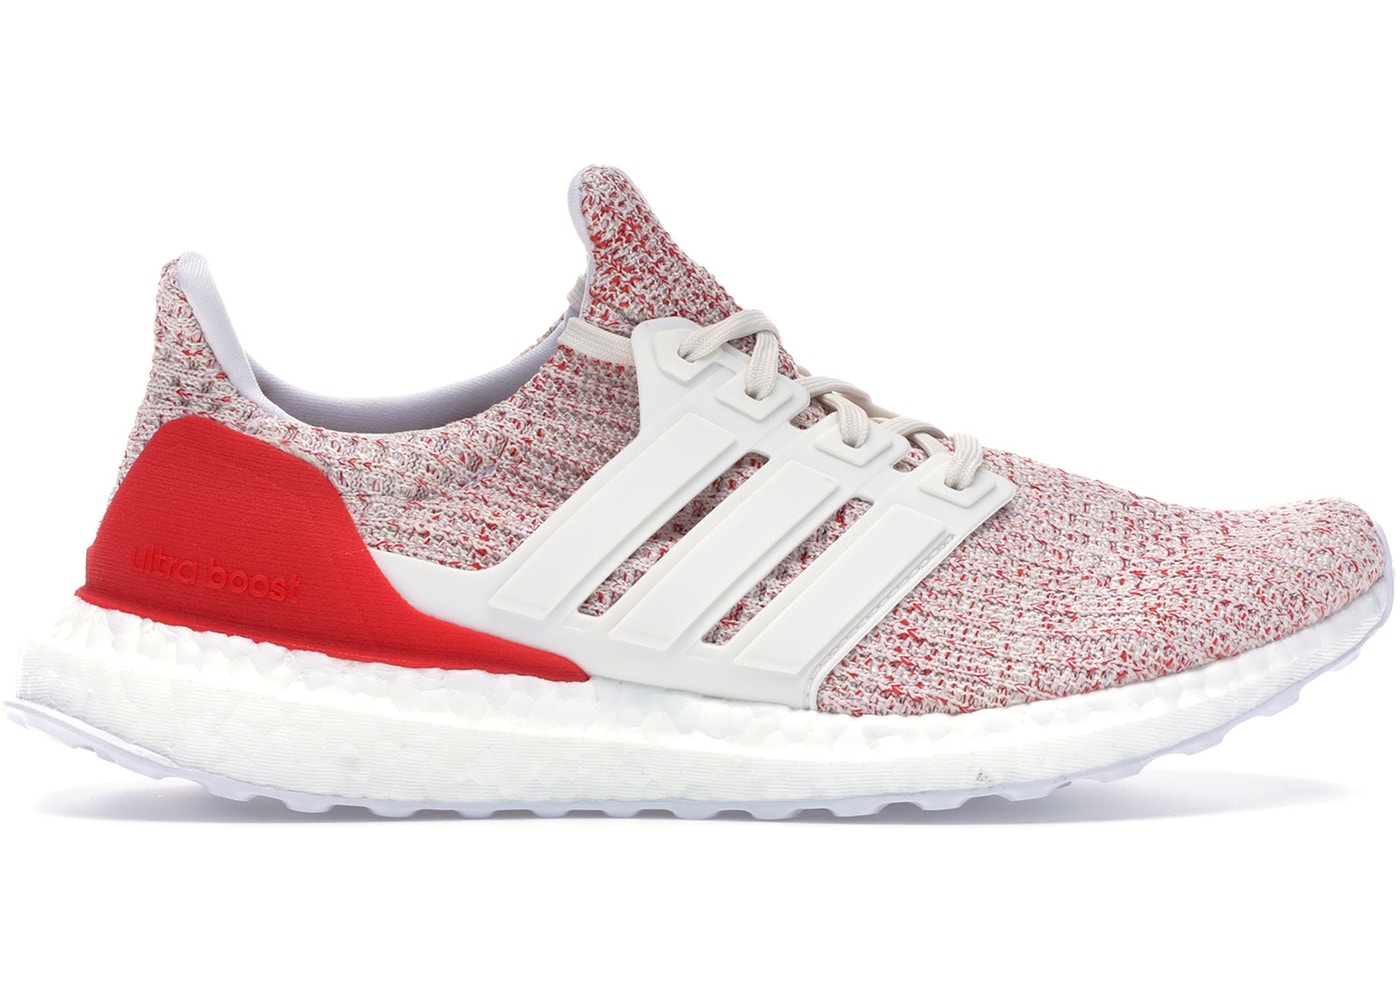 adidas ultra boost red white